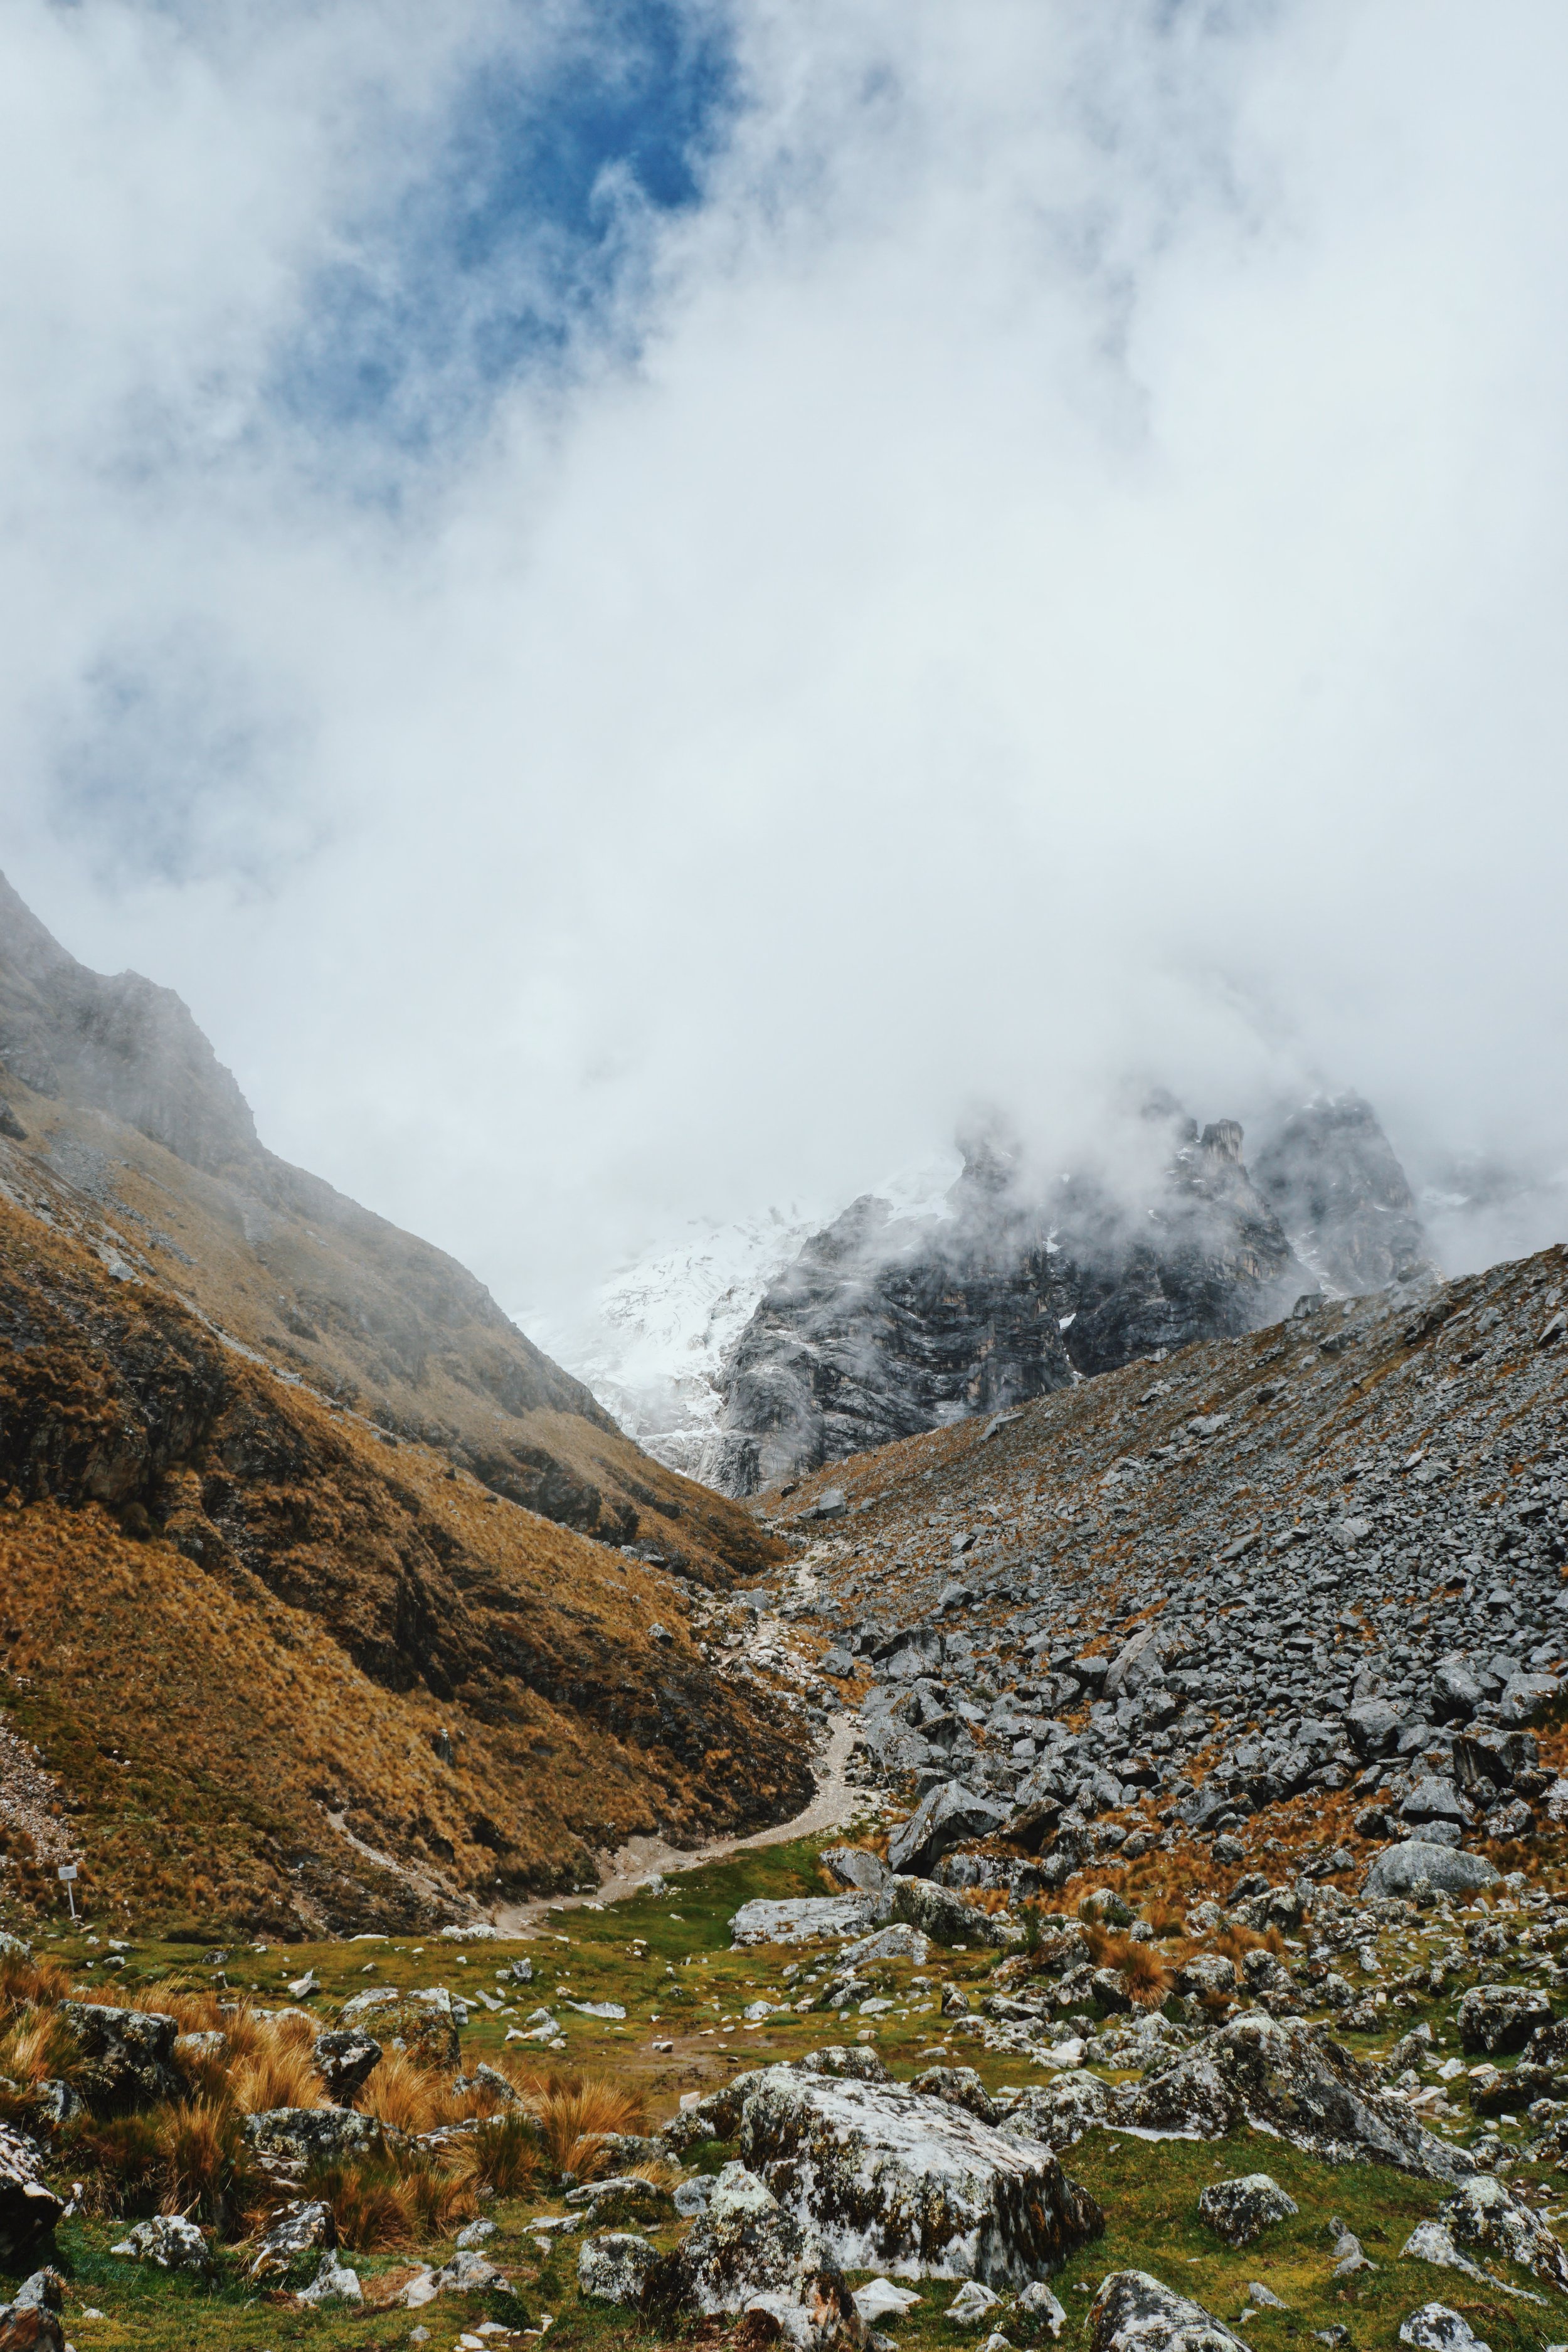  Catching glimpses of snow-capped mountains going over the Salkantay Pass. 